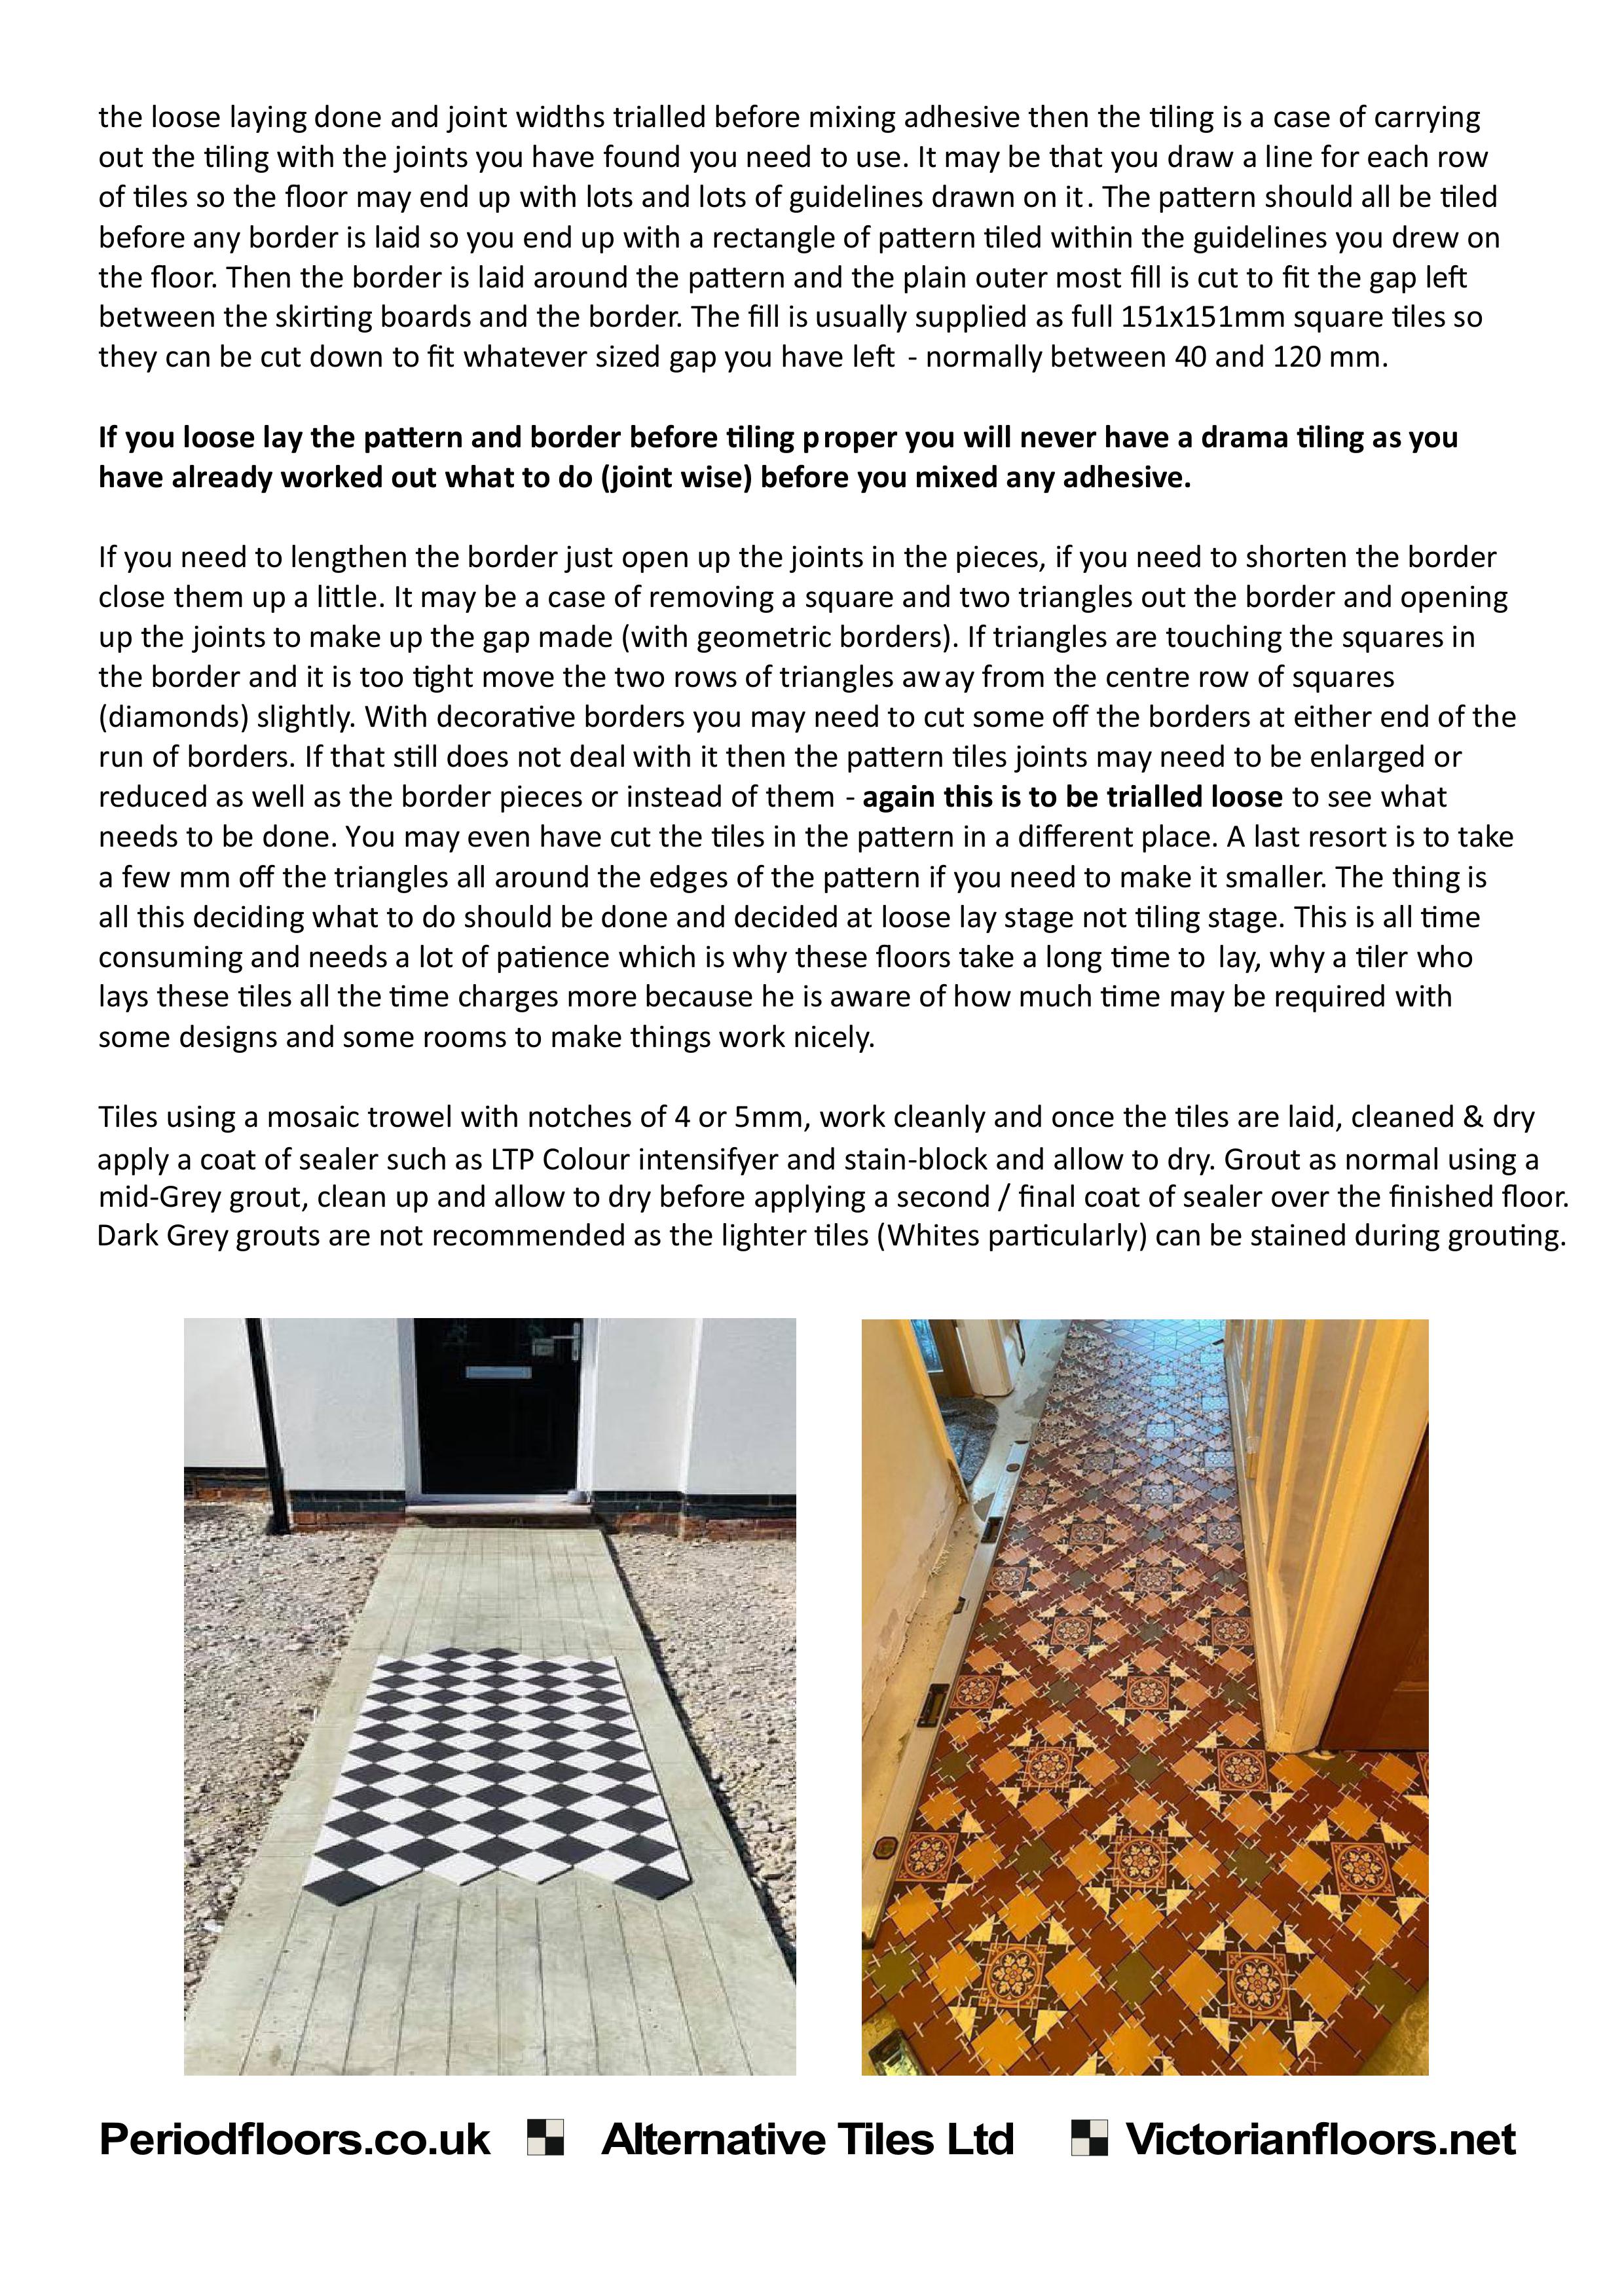 Victorian and Period Floor Preparation advice page 2